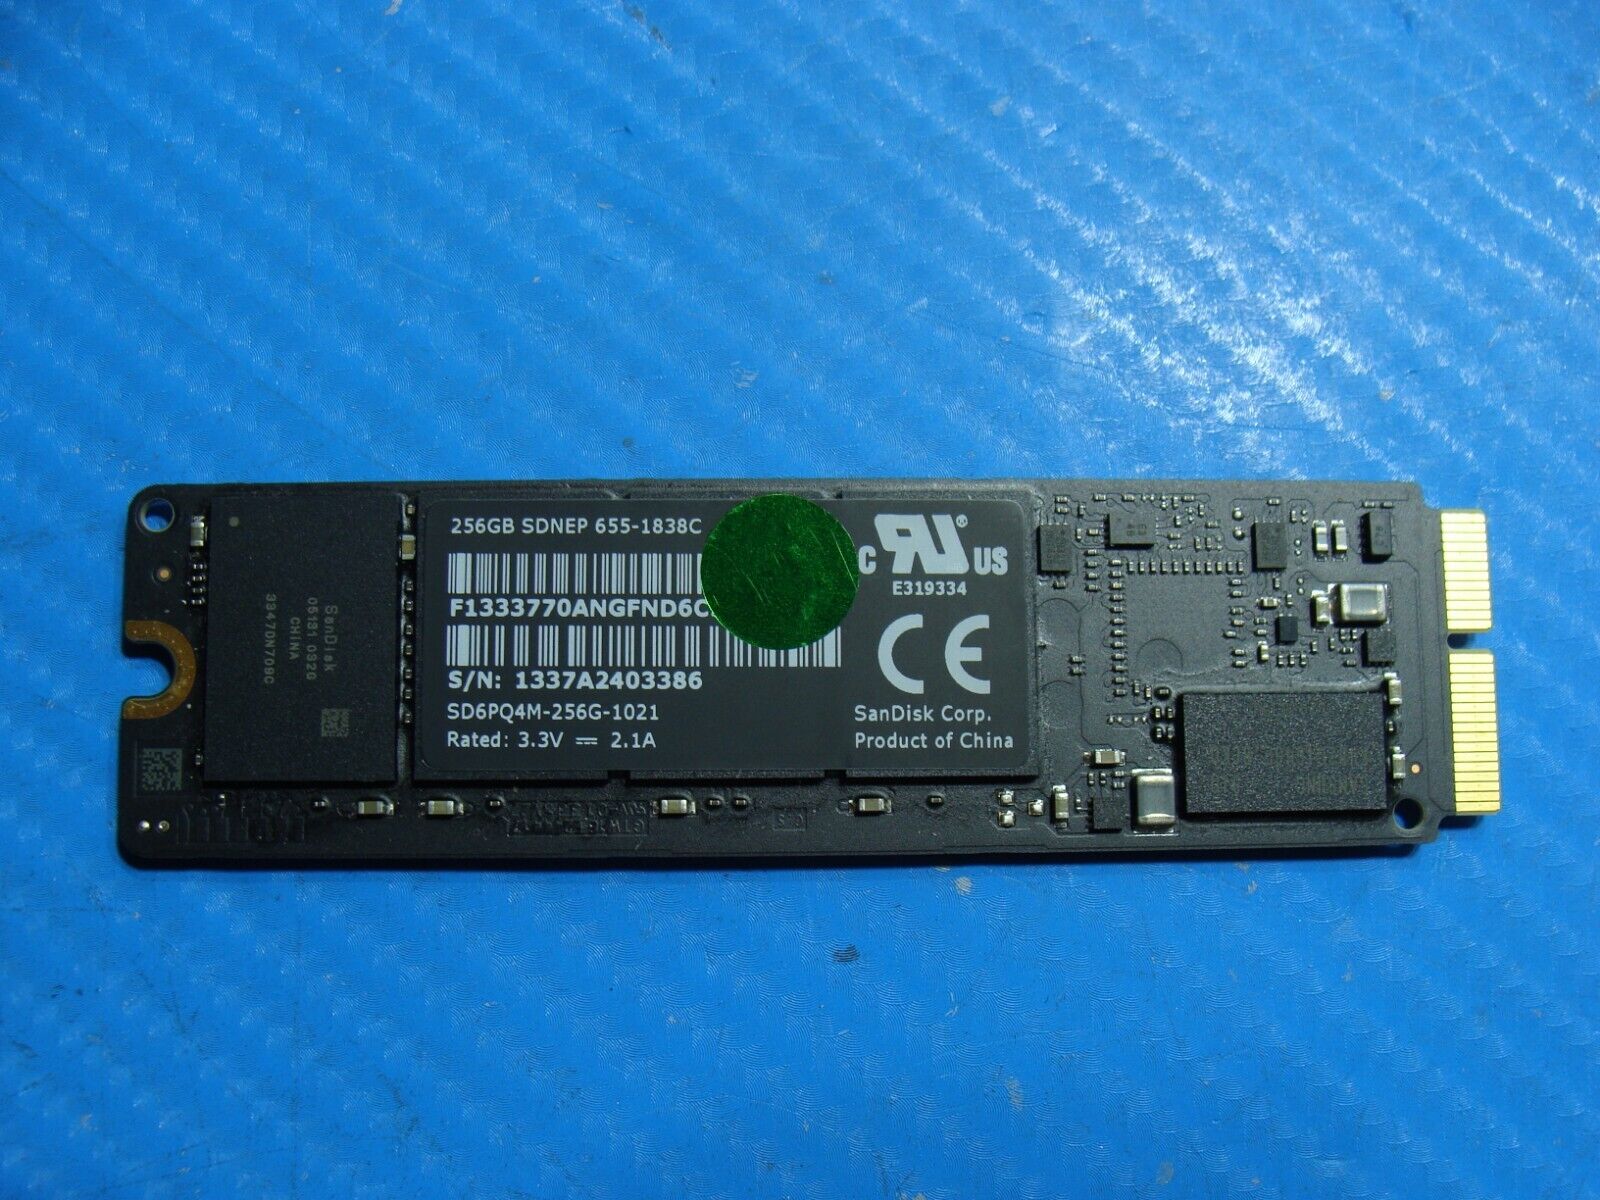 MacBook  A1446 SanDisk 256Gb SSD Solid State Drive SD6PQ4M-256G-1021H 655-1838C